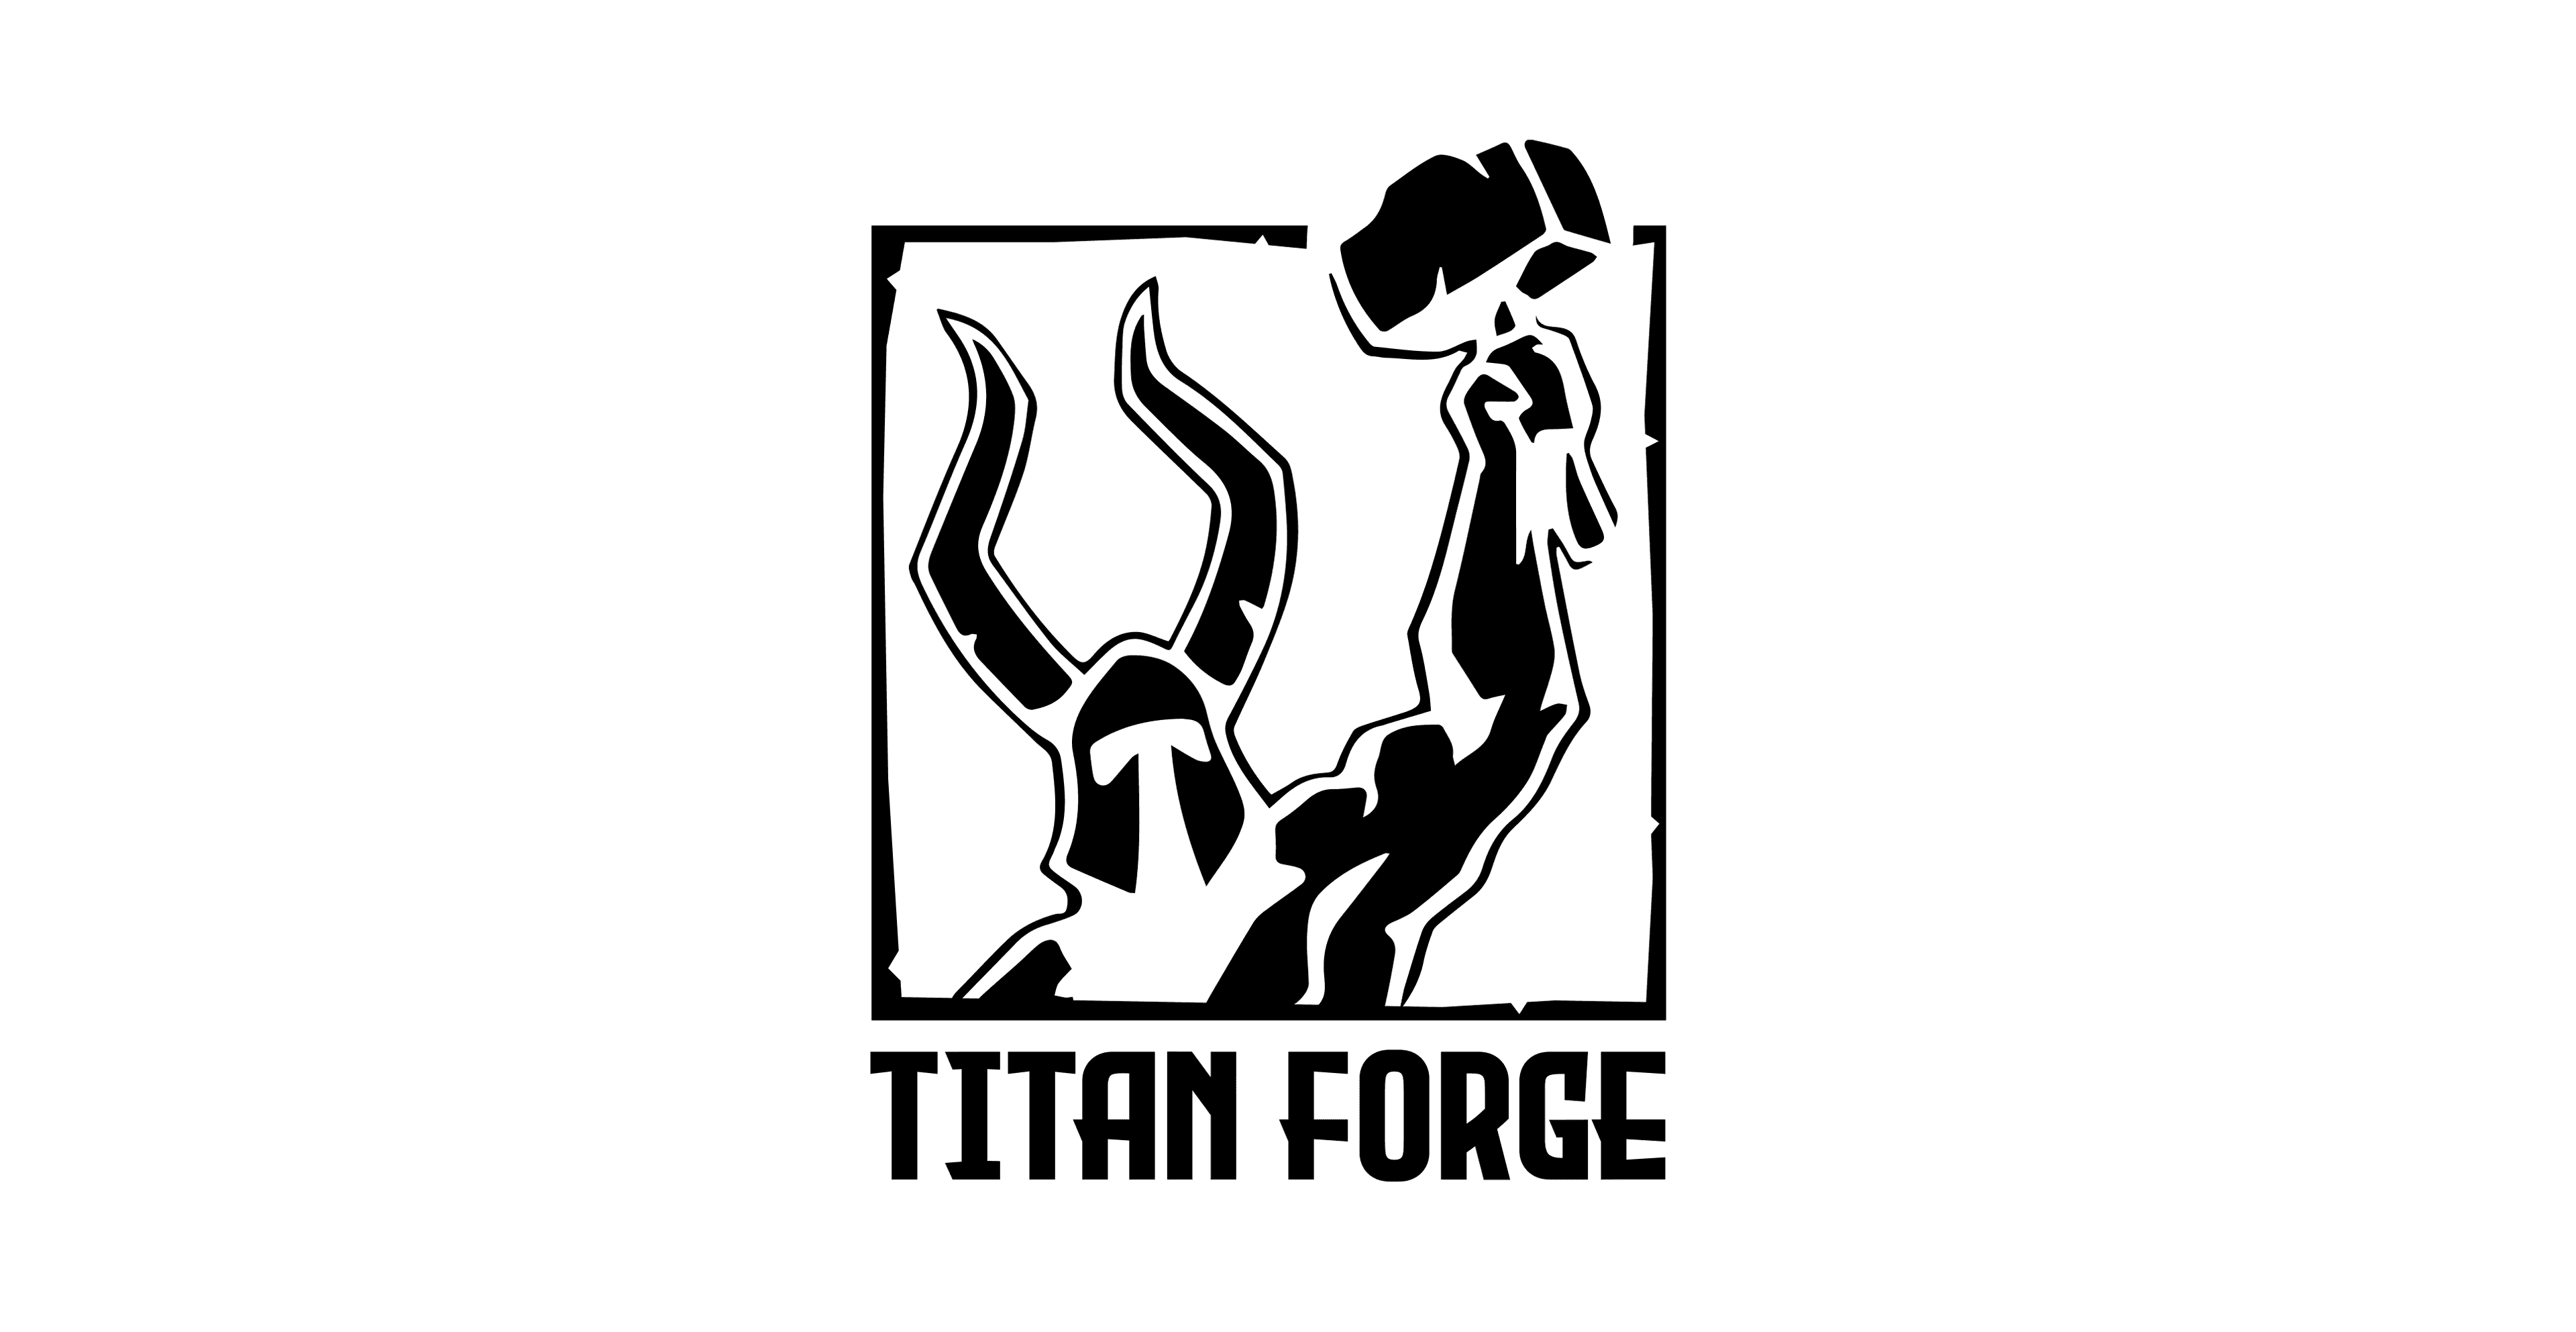 Welcome to Titan Forge! 
How are thangs?